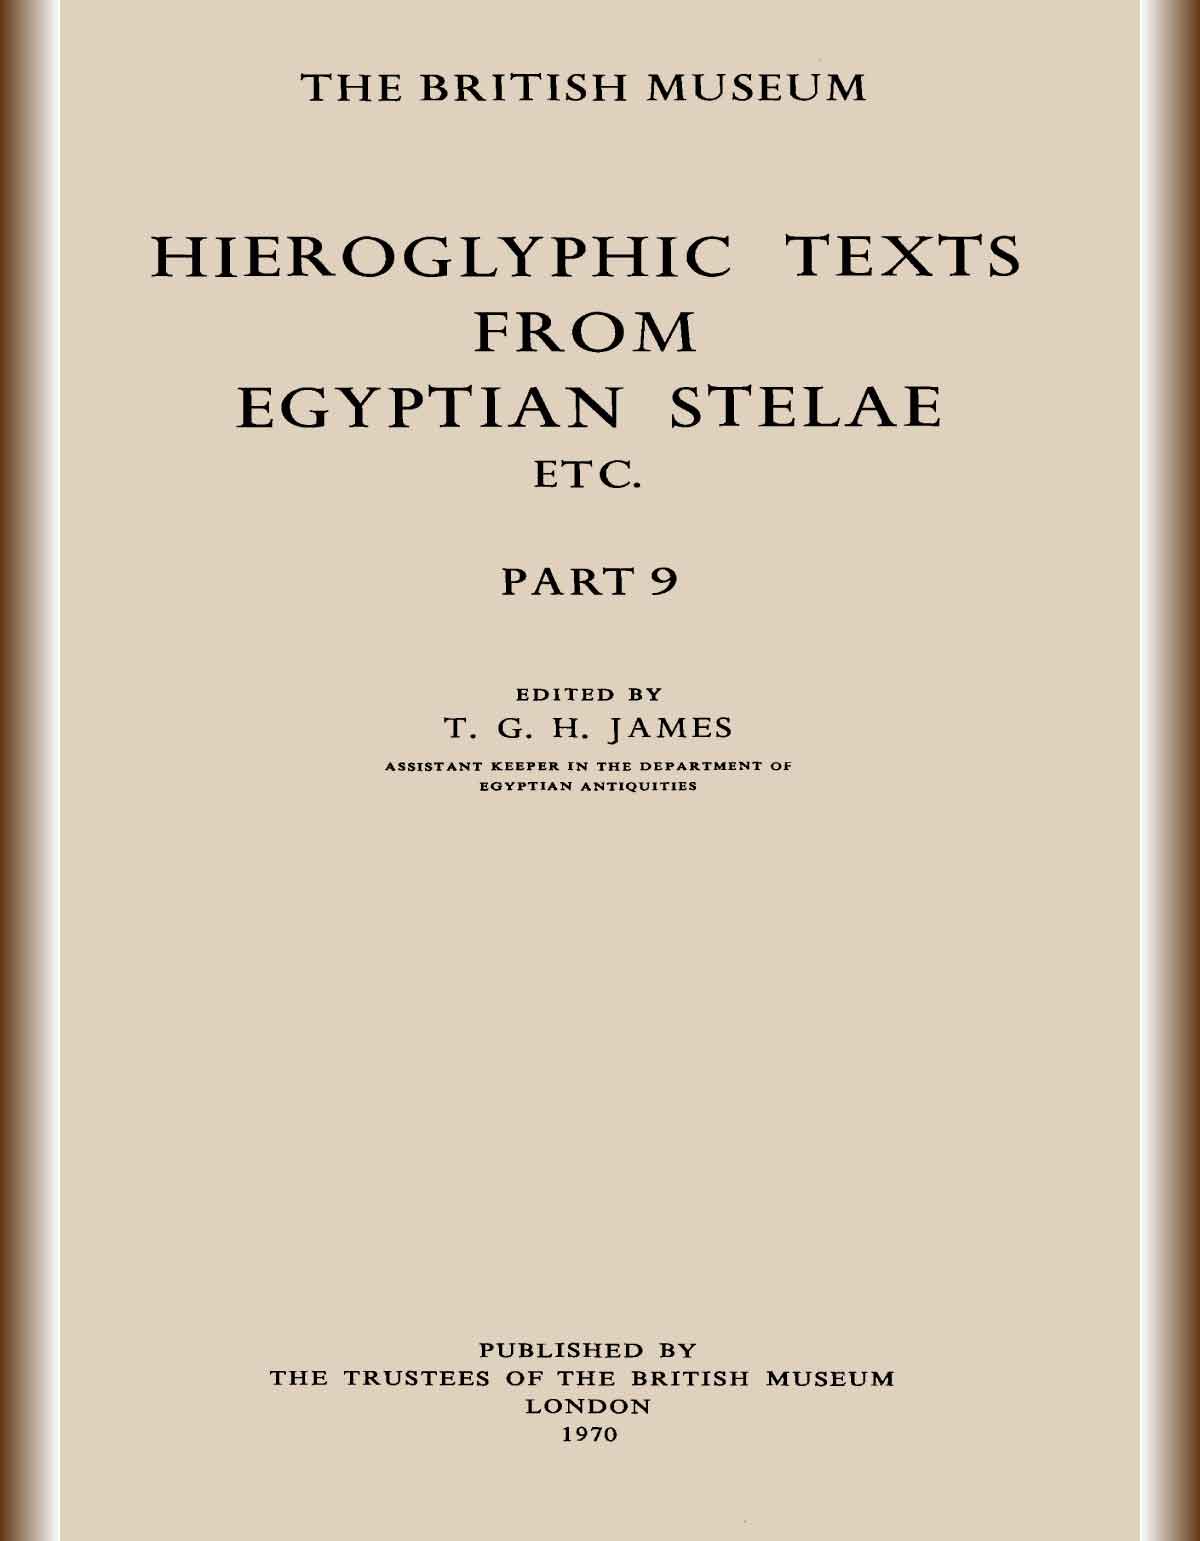 Hieroglyphic texts from Egyptian stelae etc. Part 9-cover